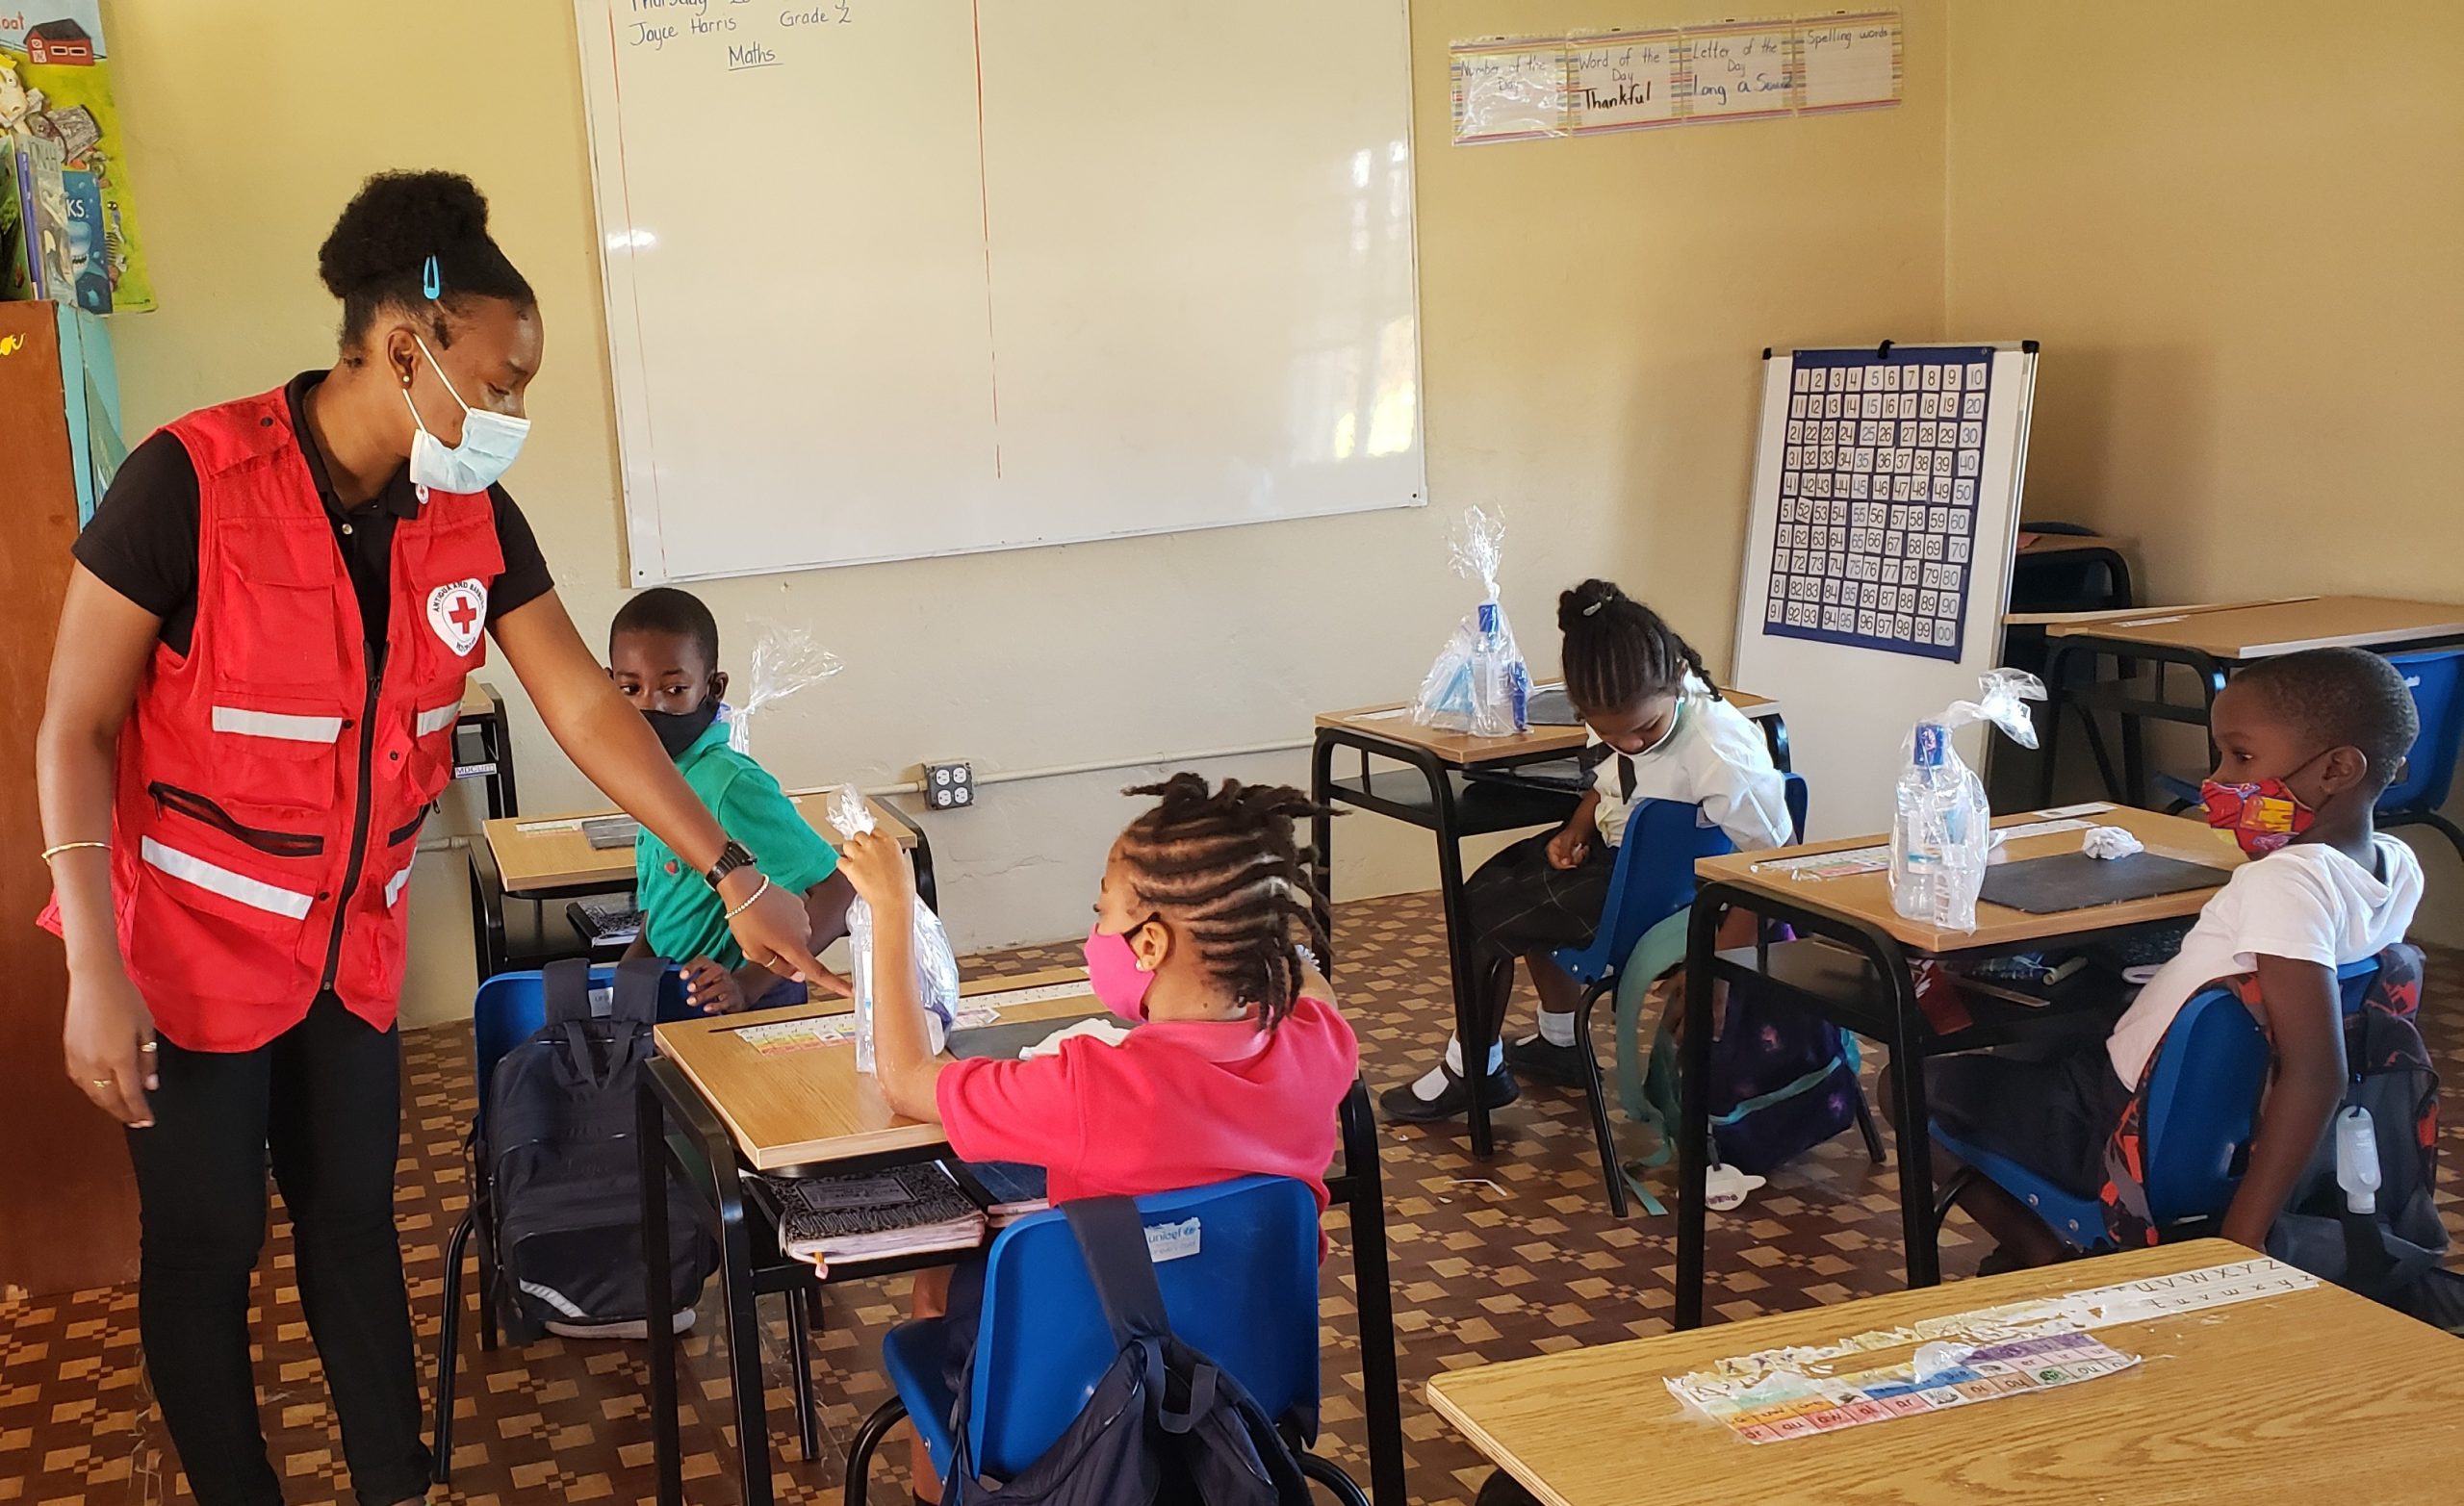 The Antigua and Barbuda Red Cross recently distributed 350 packages comprising hand sanitizers, masks and anti-bacterial wipes to students, teachers and auxiliary staff members of the Holy Trinity Primary and Sir McChesney George Secondary schools in Barbuda